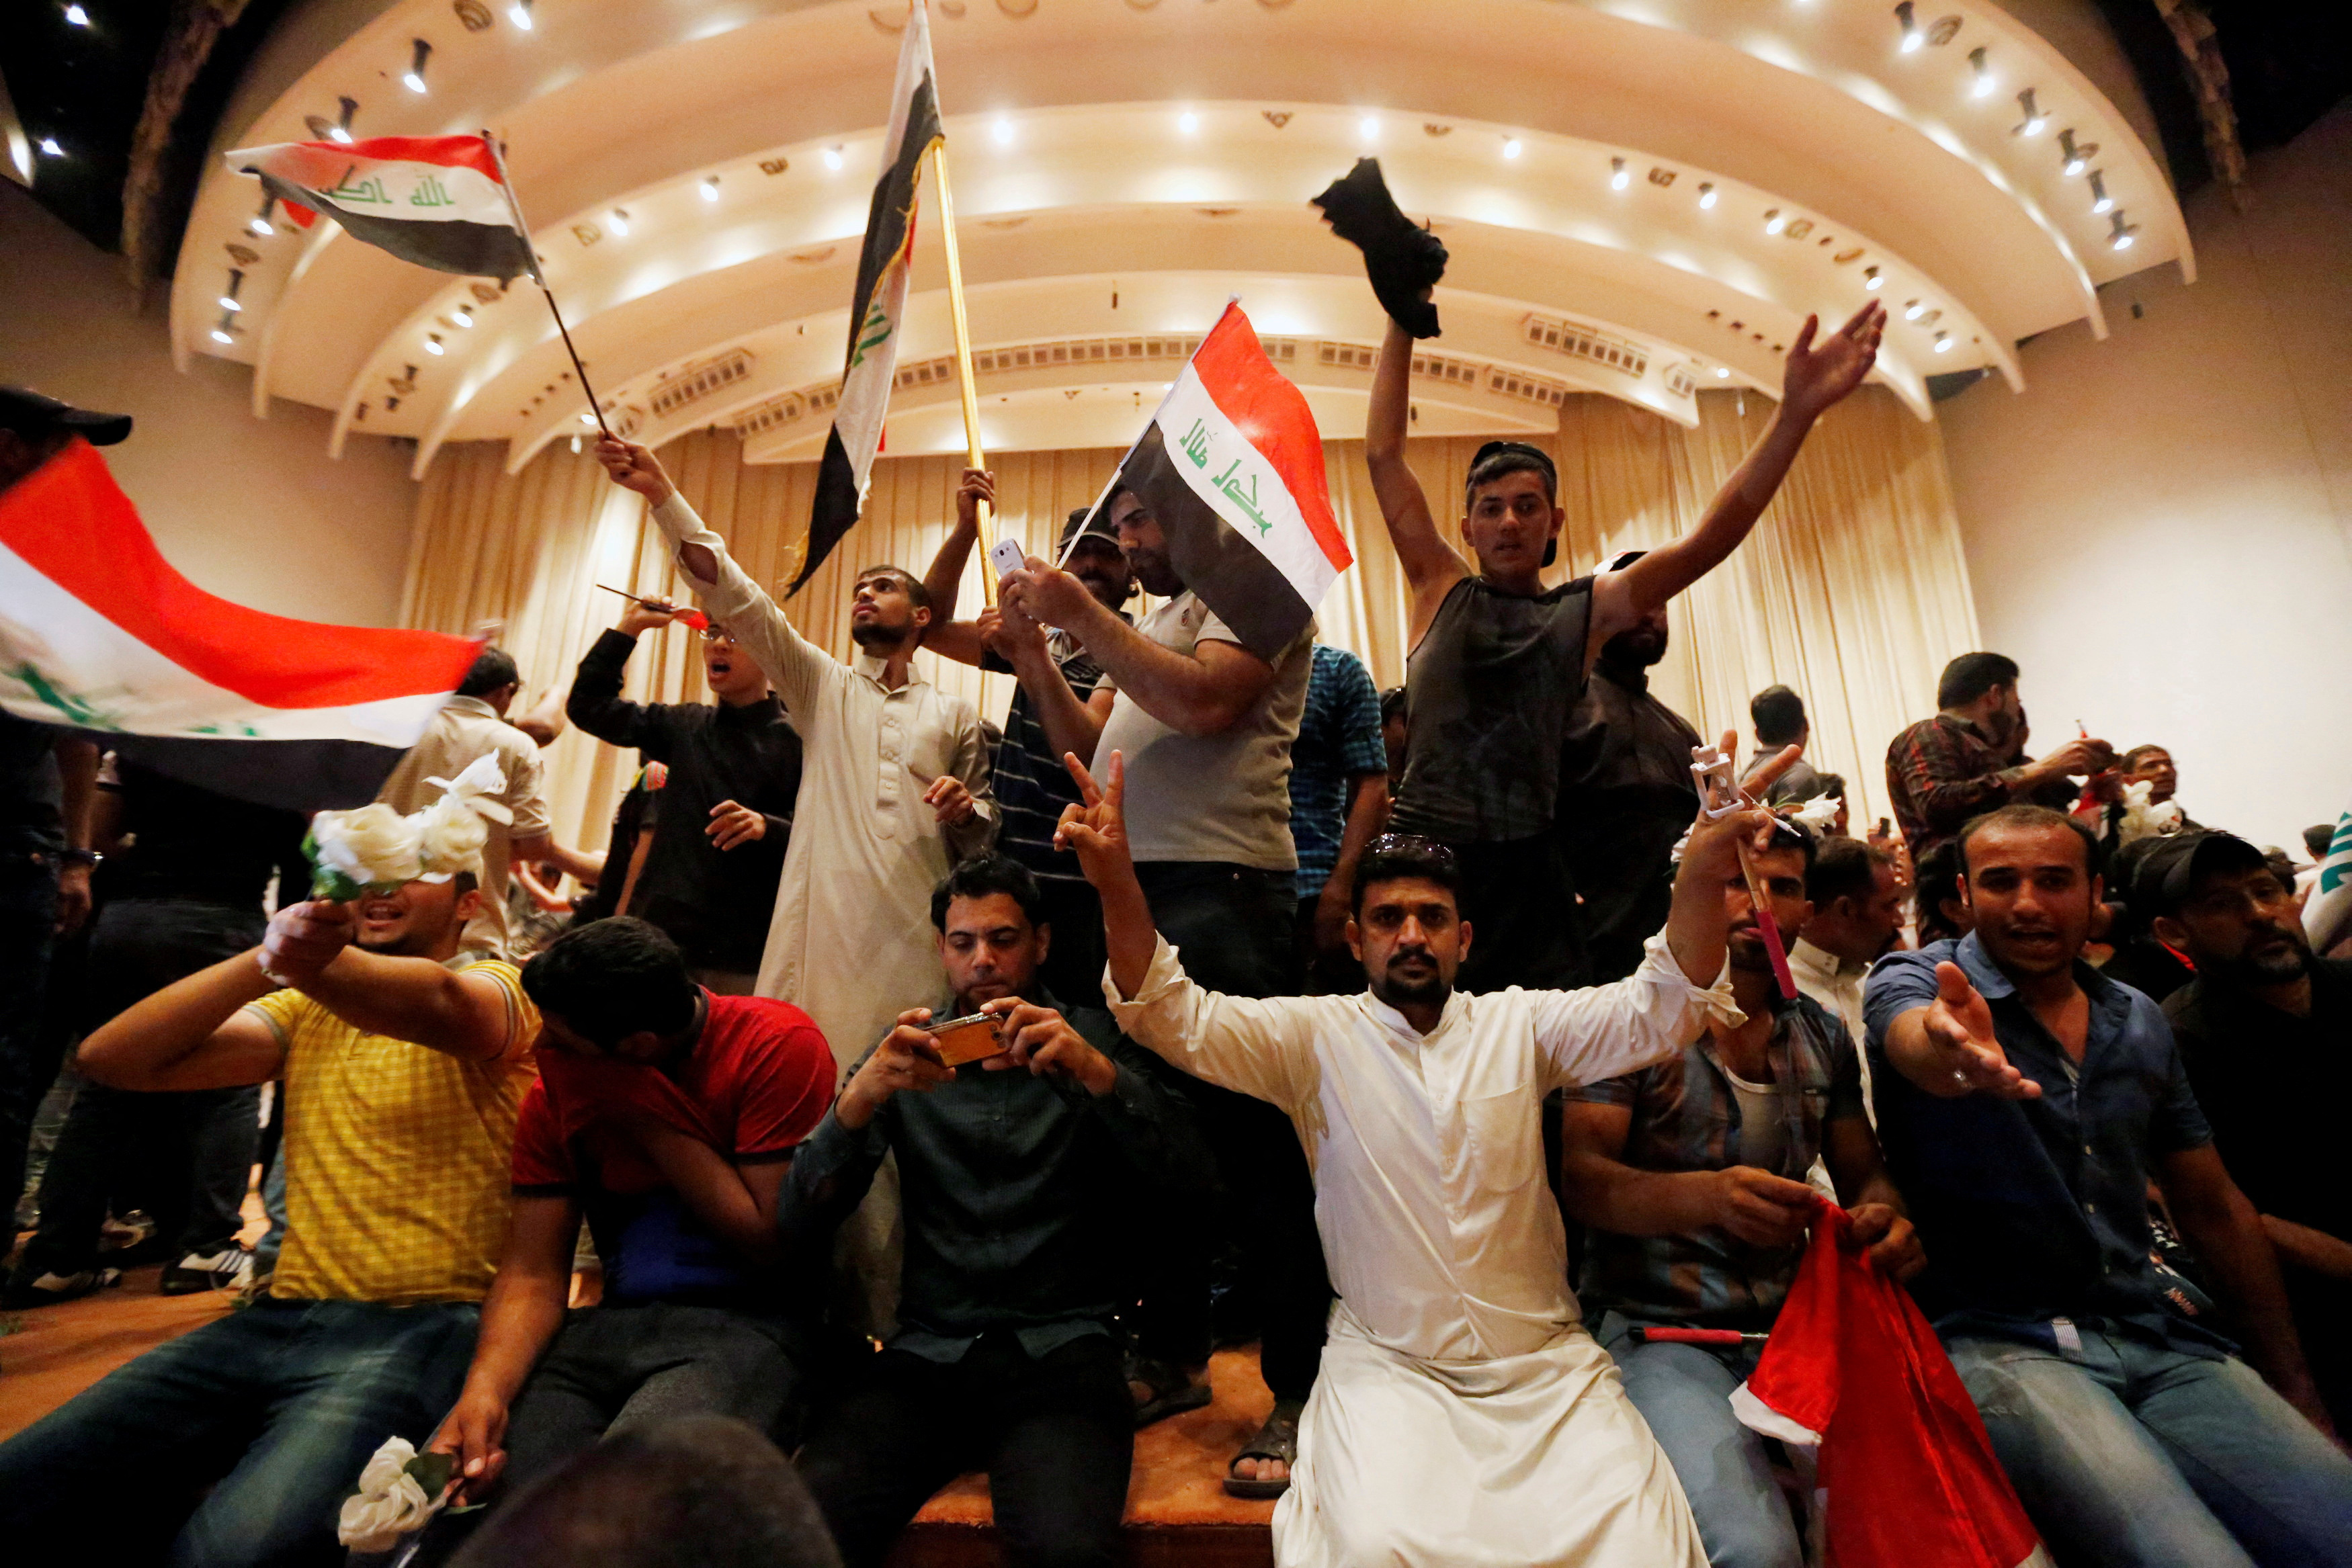 Followers of Iraq's Shi'ite cleric Moqtada al-Sadr are seen in the parliament building after they stormed Baghdad's Green Zone after lawmakers failed to convene for a vote on overhauling the government